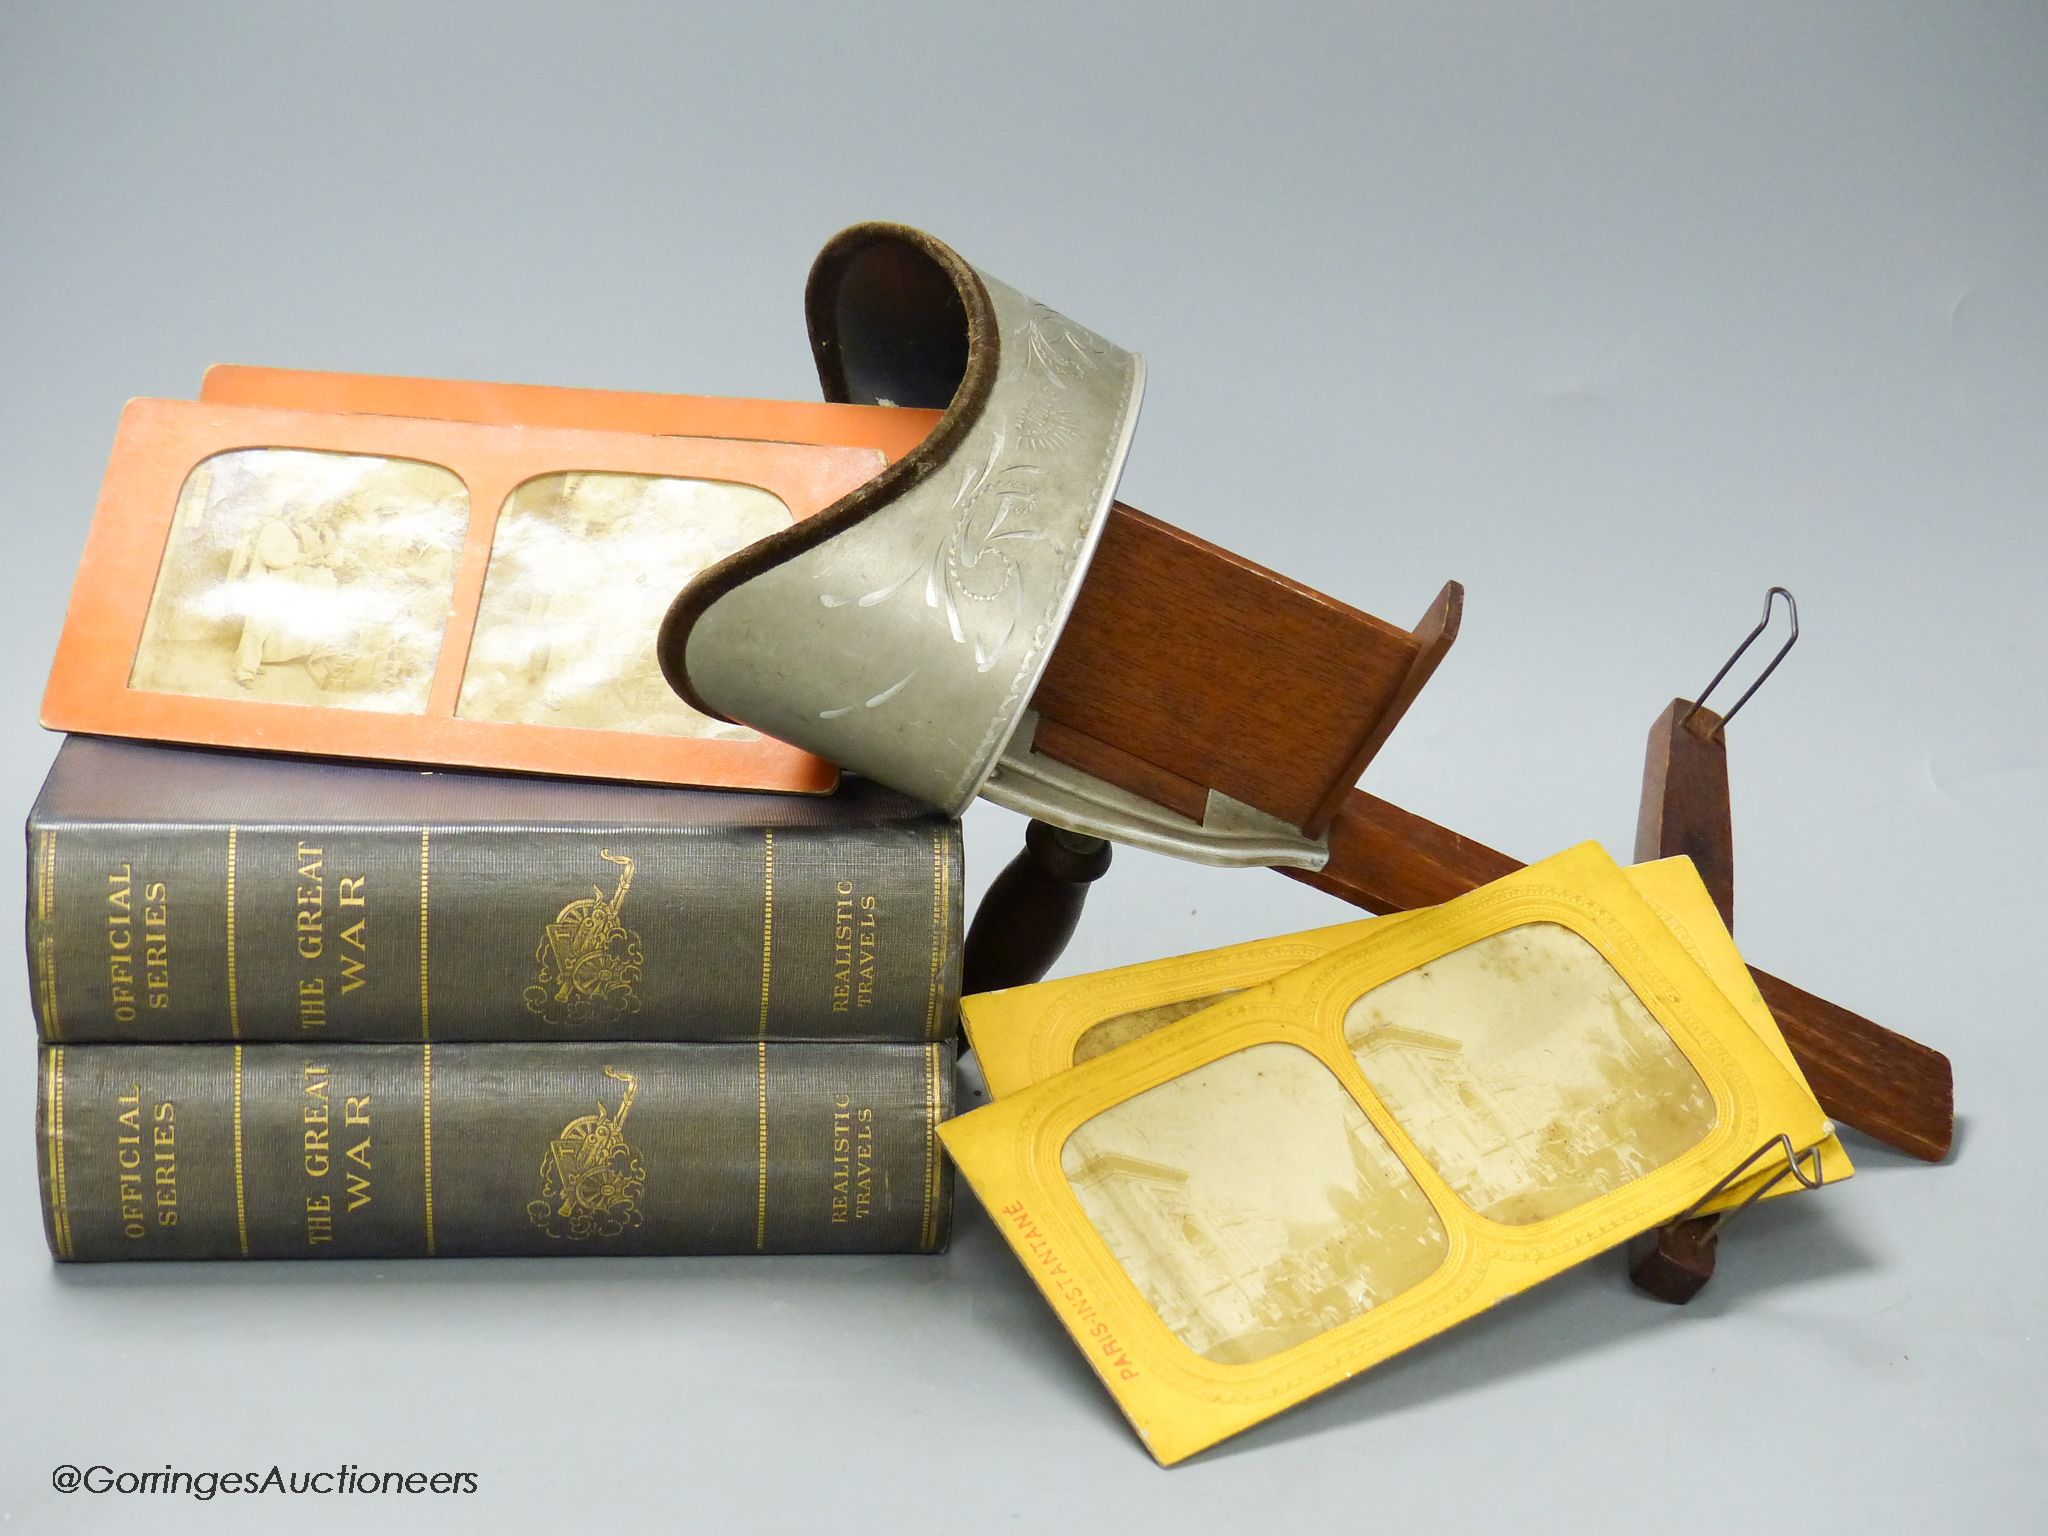 An Underwood & Underwood stereoscopic viewer, a collection of Realistic Travels 'The Great War' slides in book form case and twenty loose slides